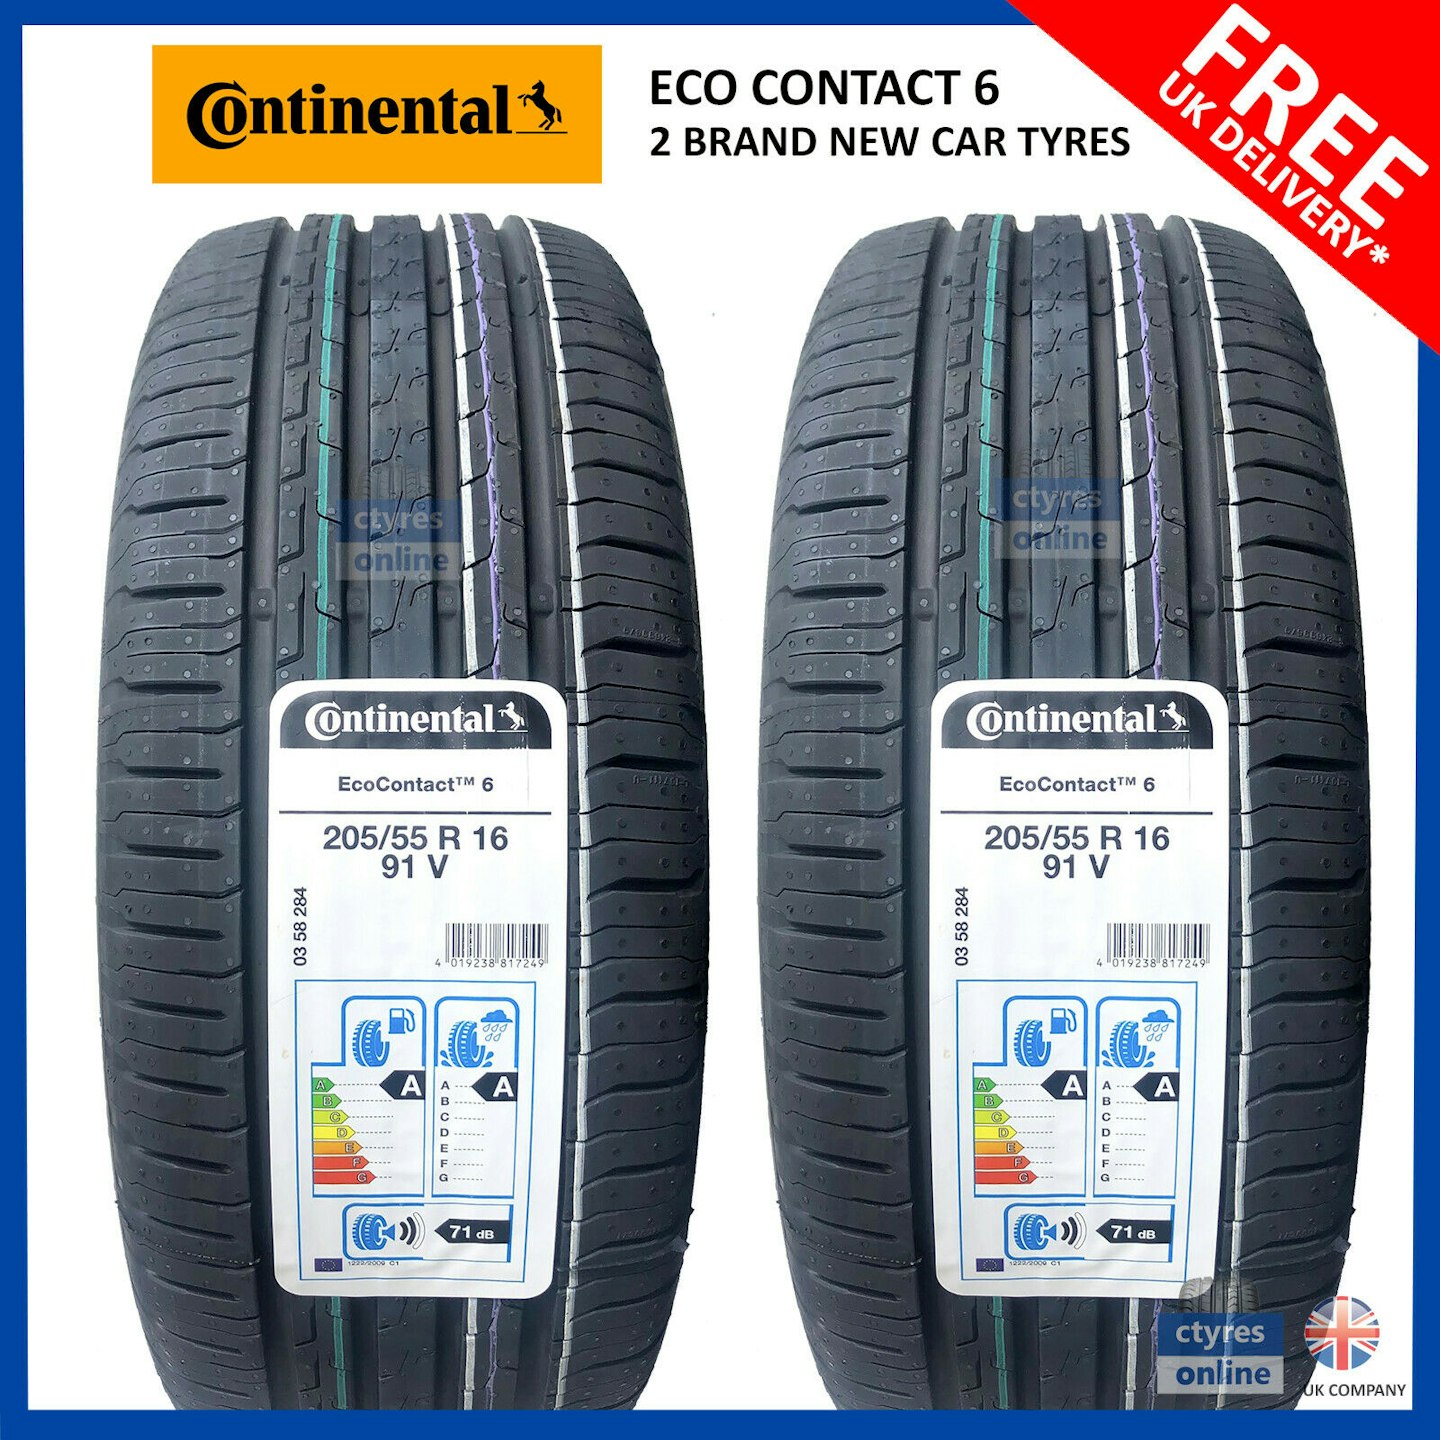 Continental Eco Contact 6 205/55R16